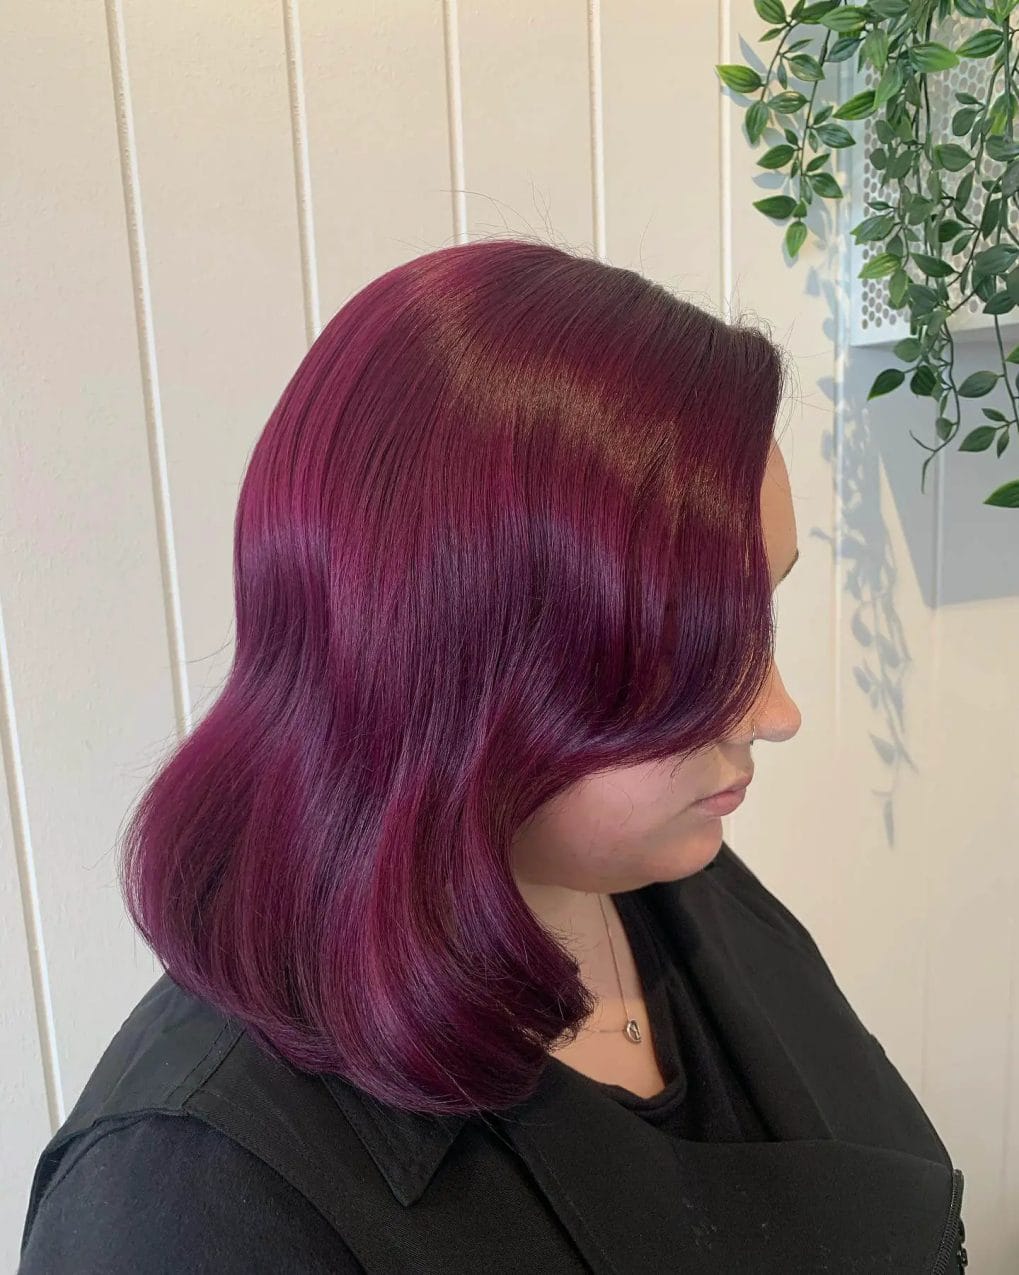 Berry-burgundy blend on a smooth shoulder-length cut with soft curves.